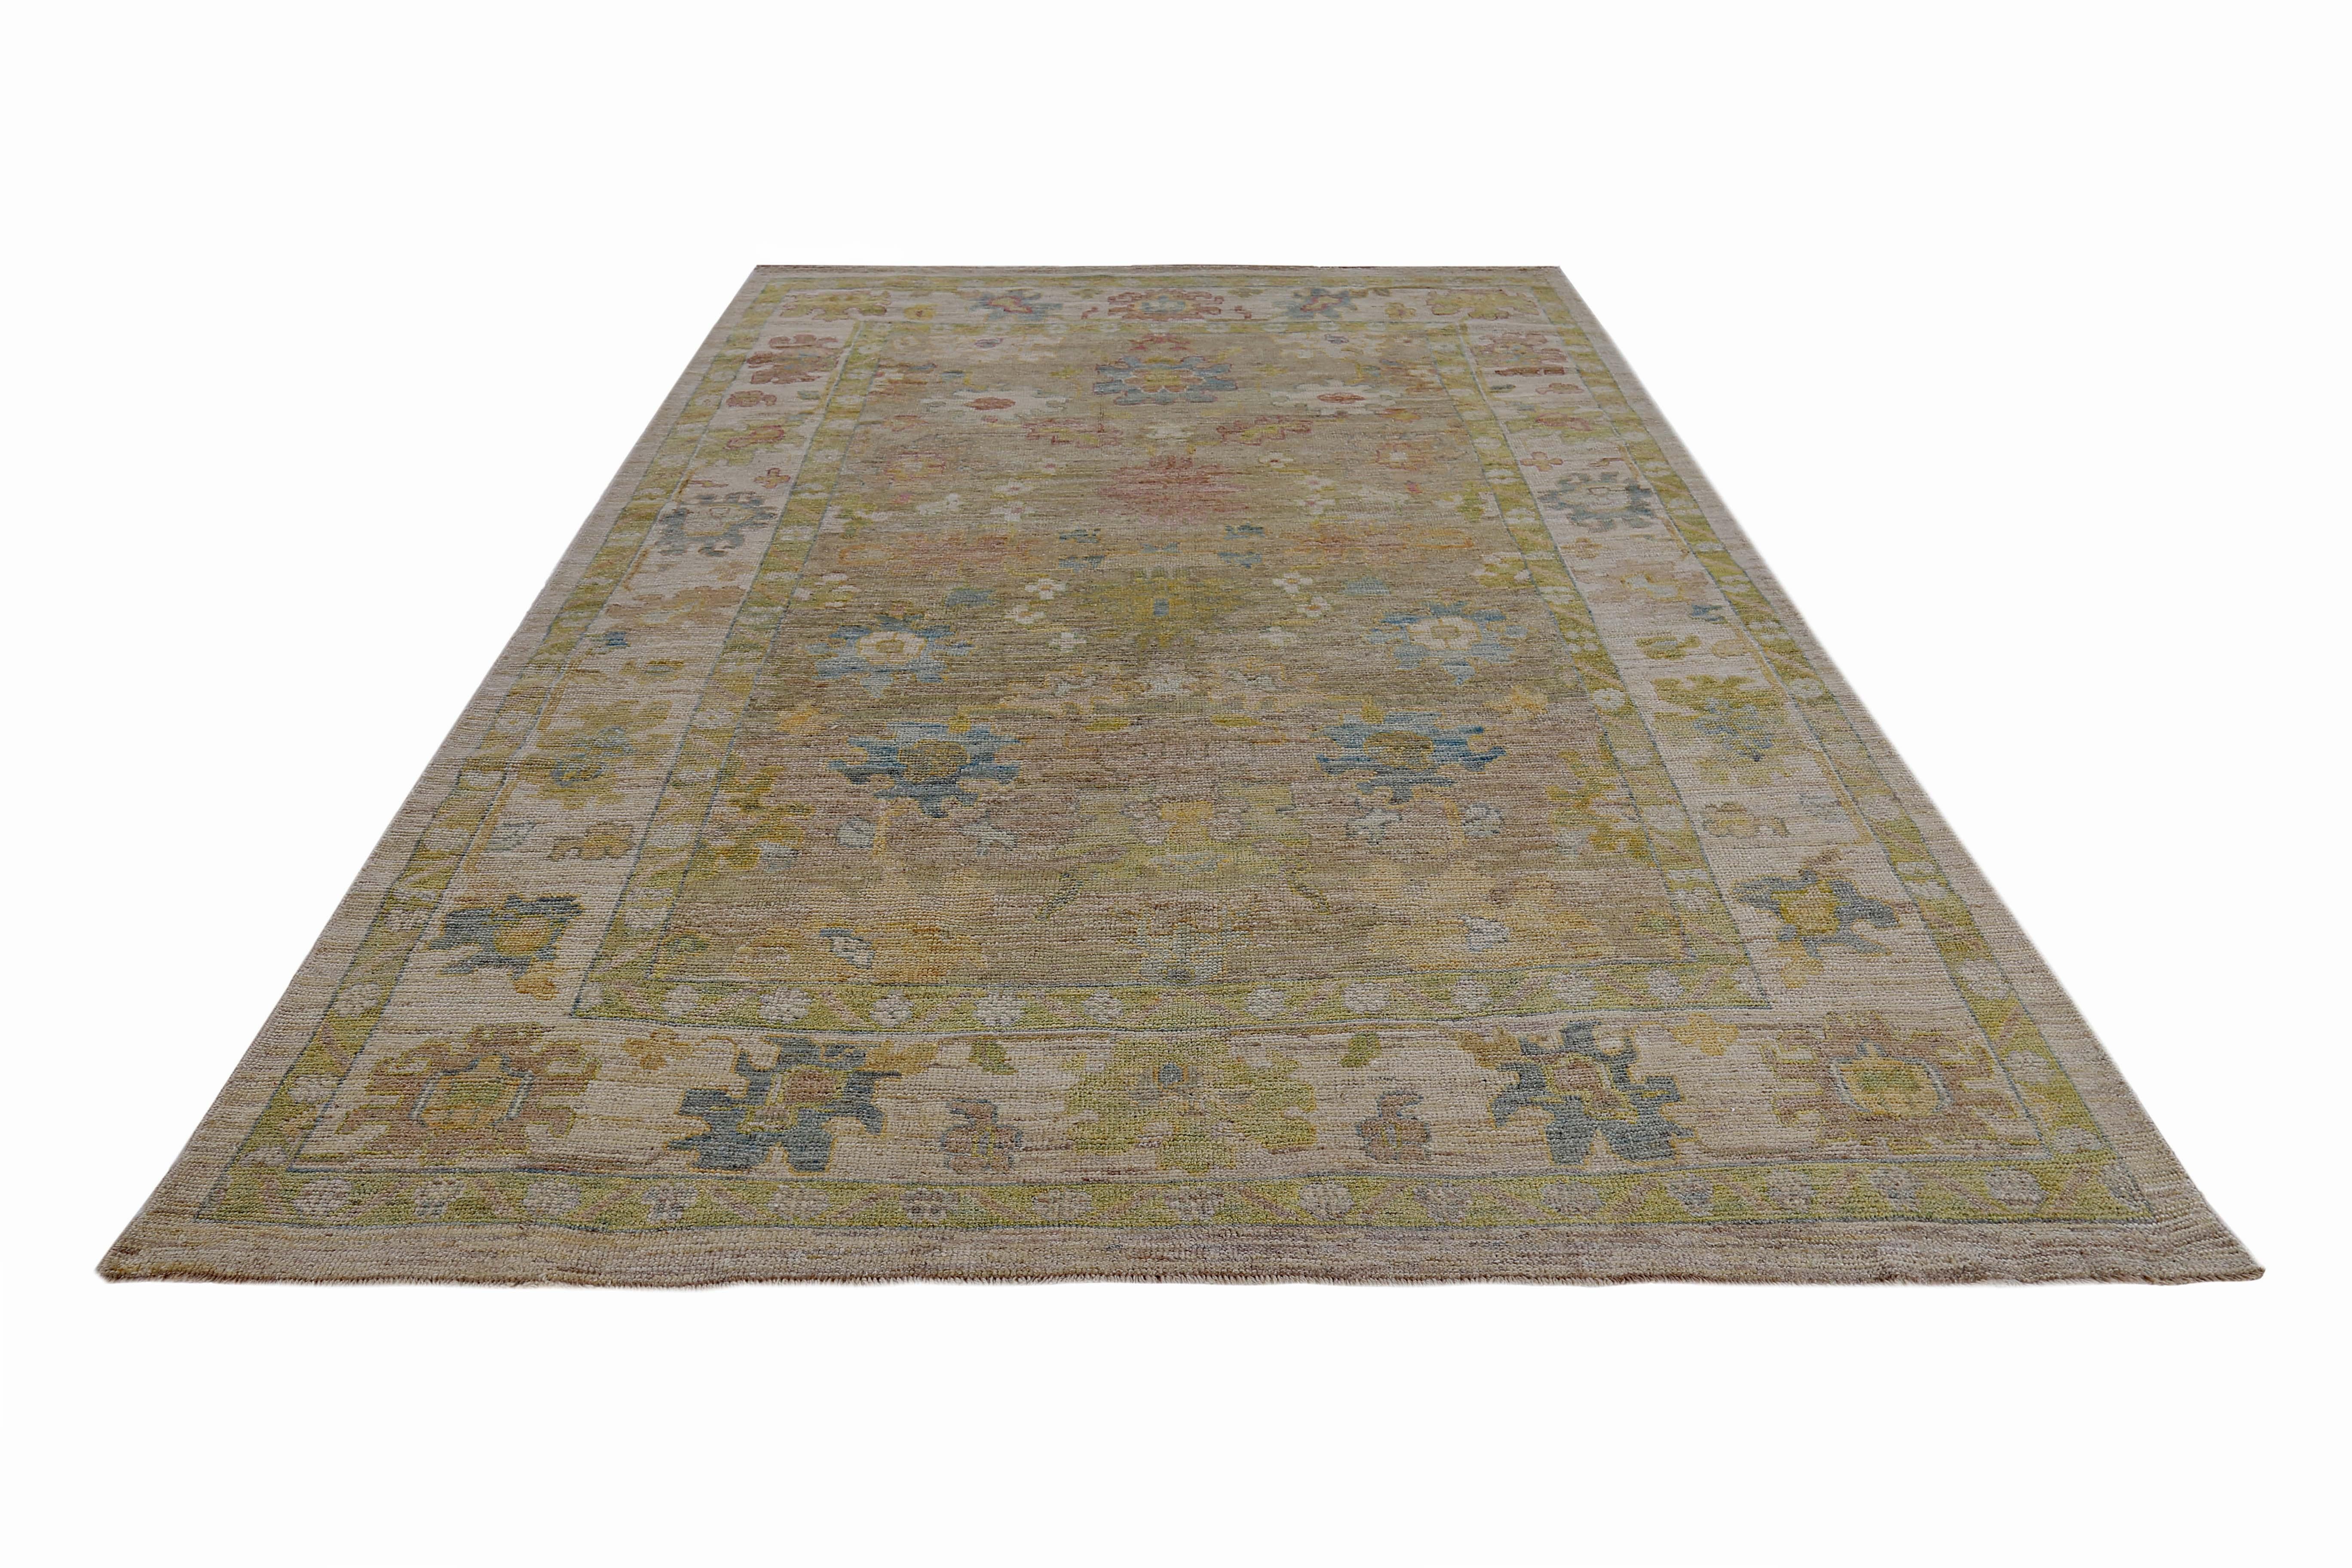 Turkish rug made of handwoven sheep’s wool of the finest quality. It’s colored with organic vegetable dyes that are certified safe for humans and pets alike. It features blue, red and green flower heads on a beautiful brown field. Flower patterns